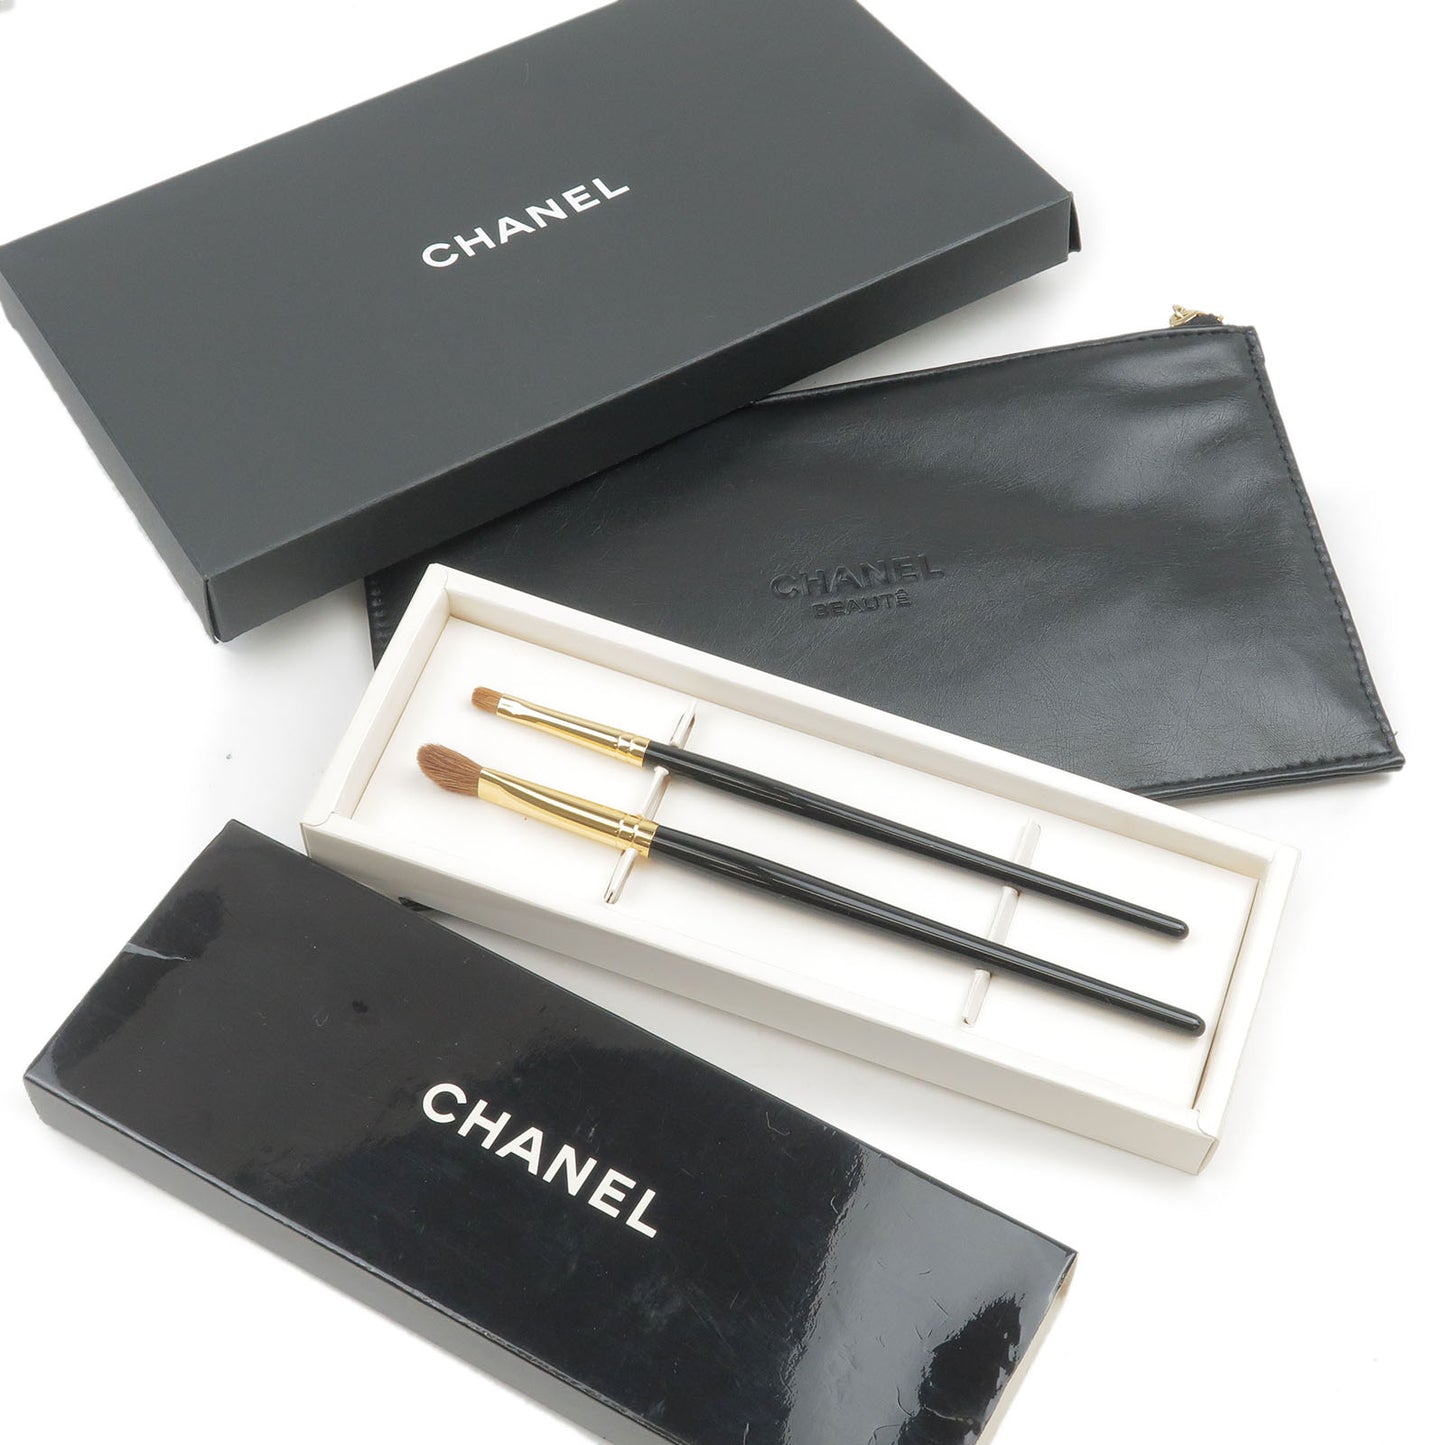 CHANEL Novelty Cosmetic Pouch and Set of 2 Makeup Brushes Black